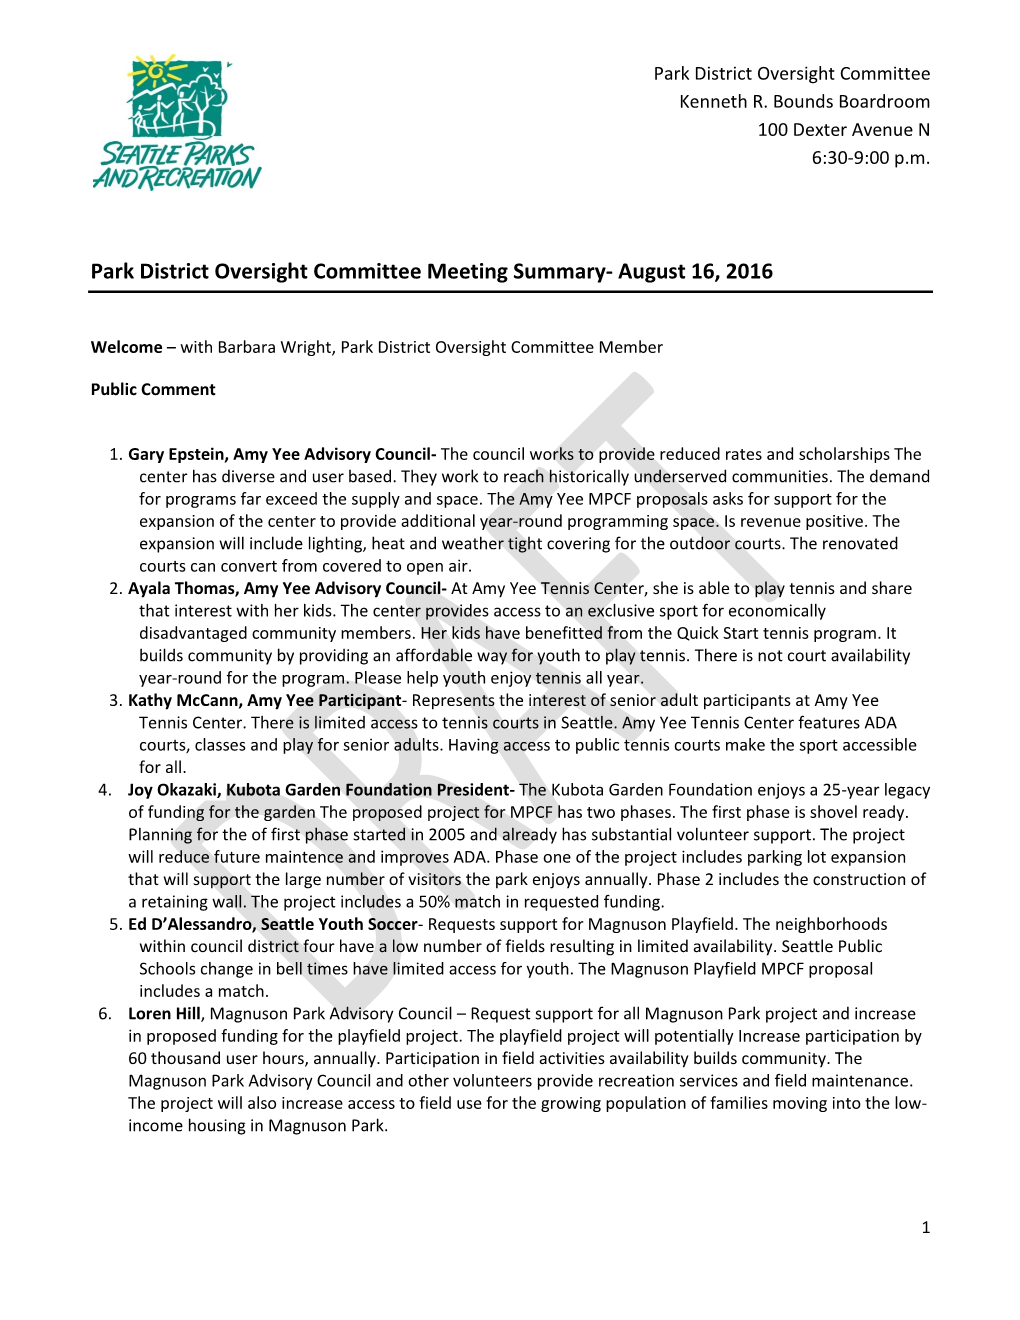 Park District Oversight Committee Meeting Summary- August 16, 2016